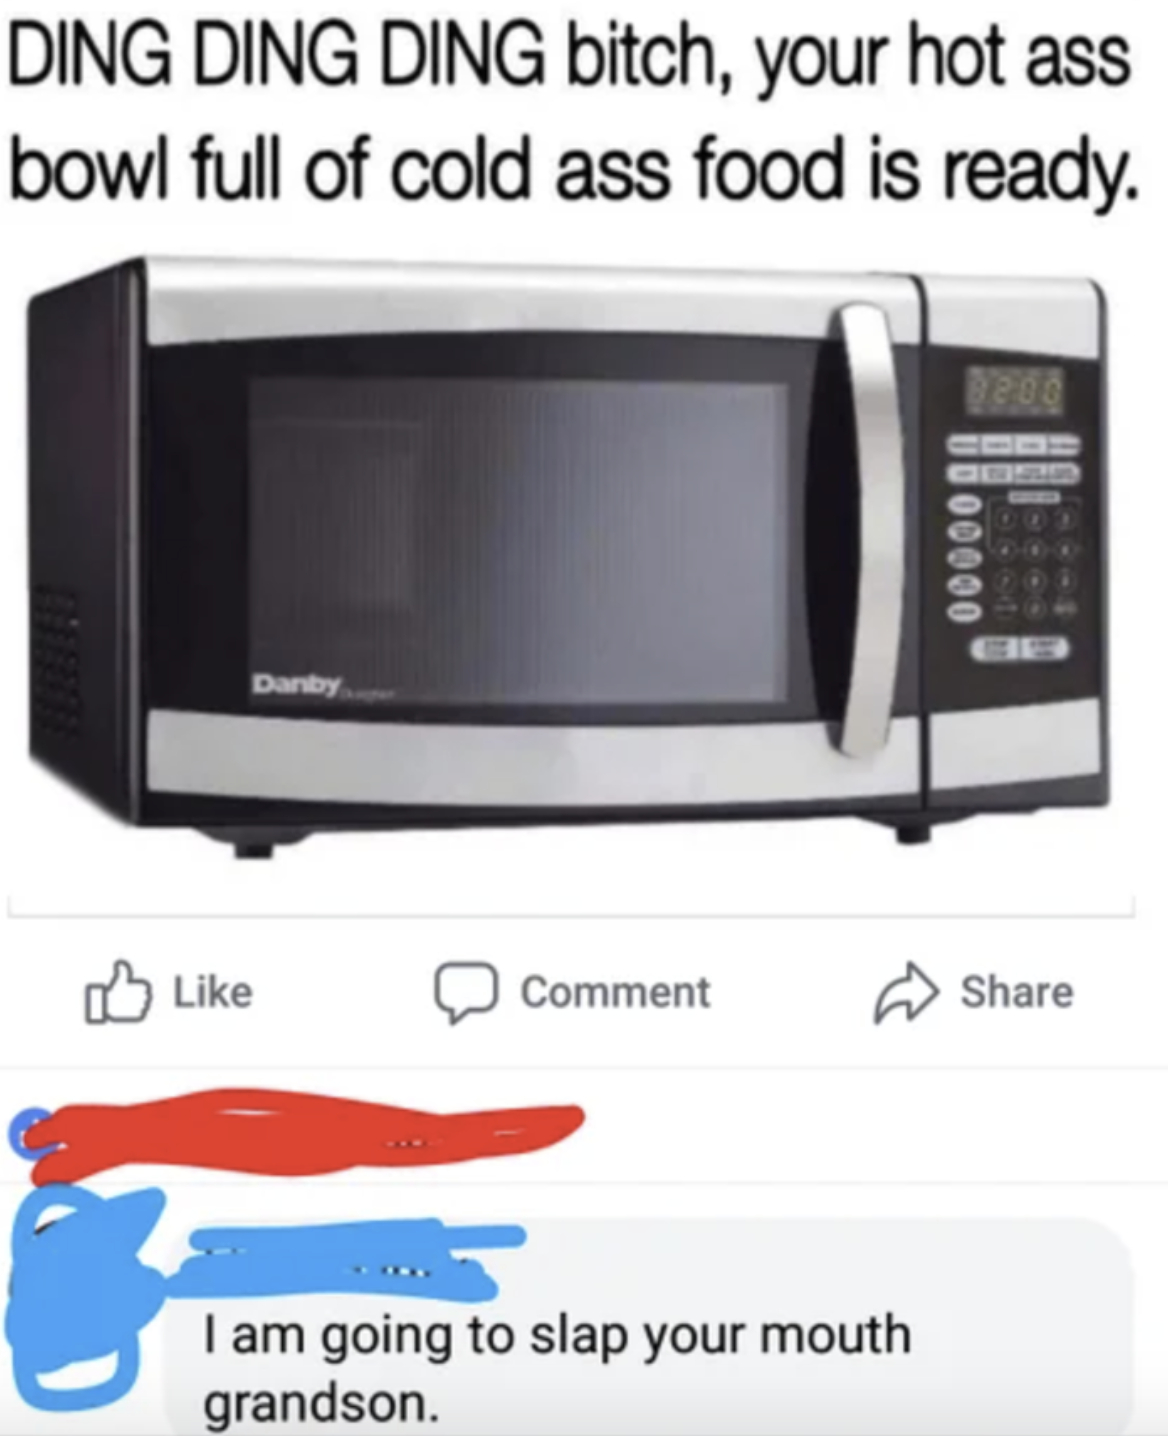 meme of a microwave that says ding ding enjoy your bowl of cold ass food and grandma said i am goign to slap your mouth